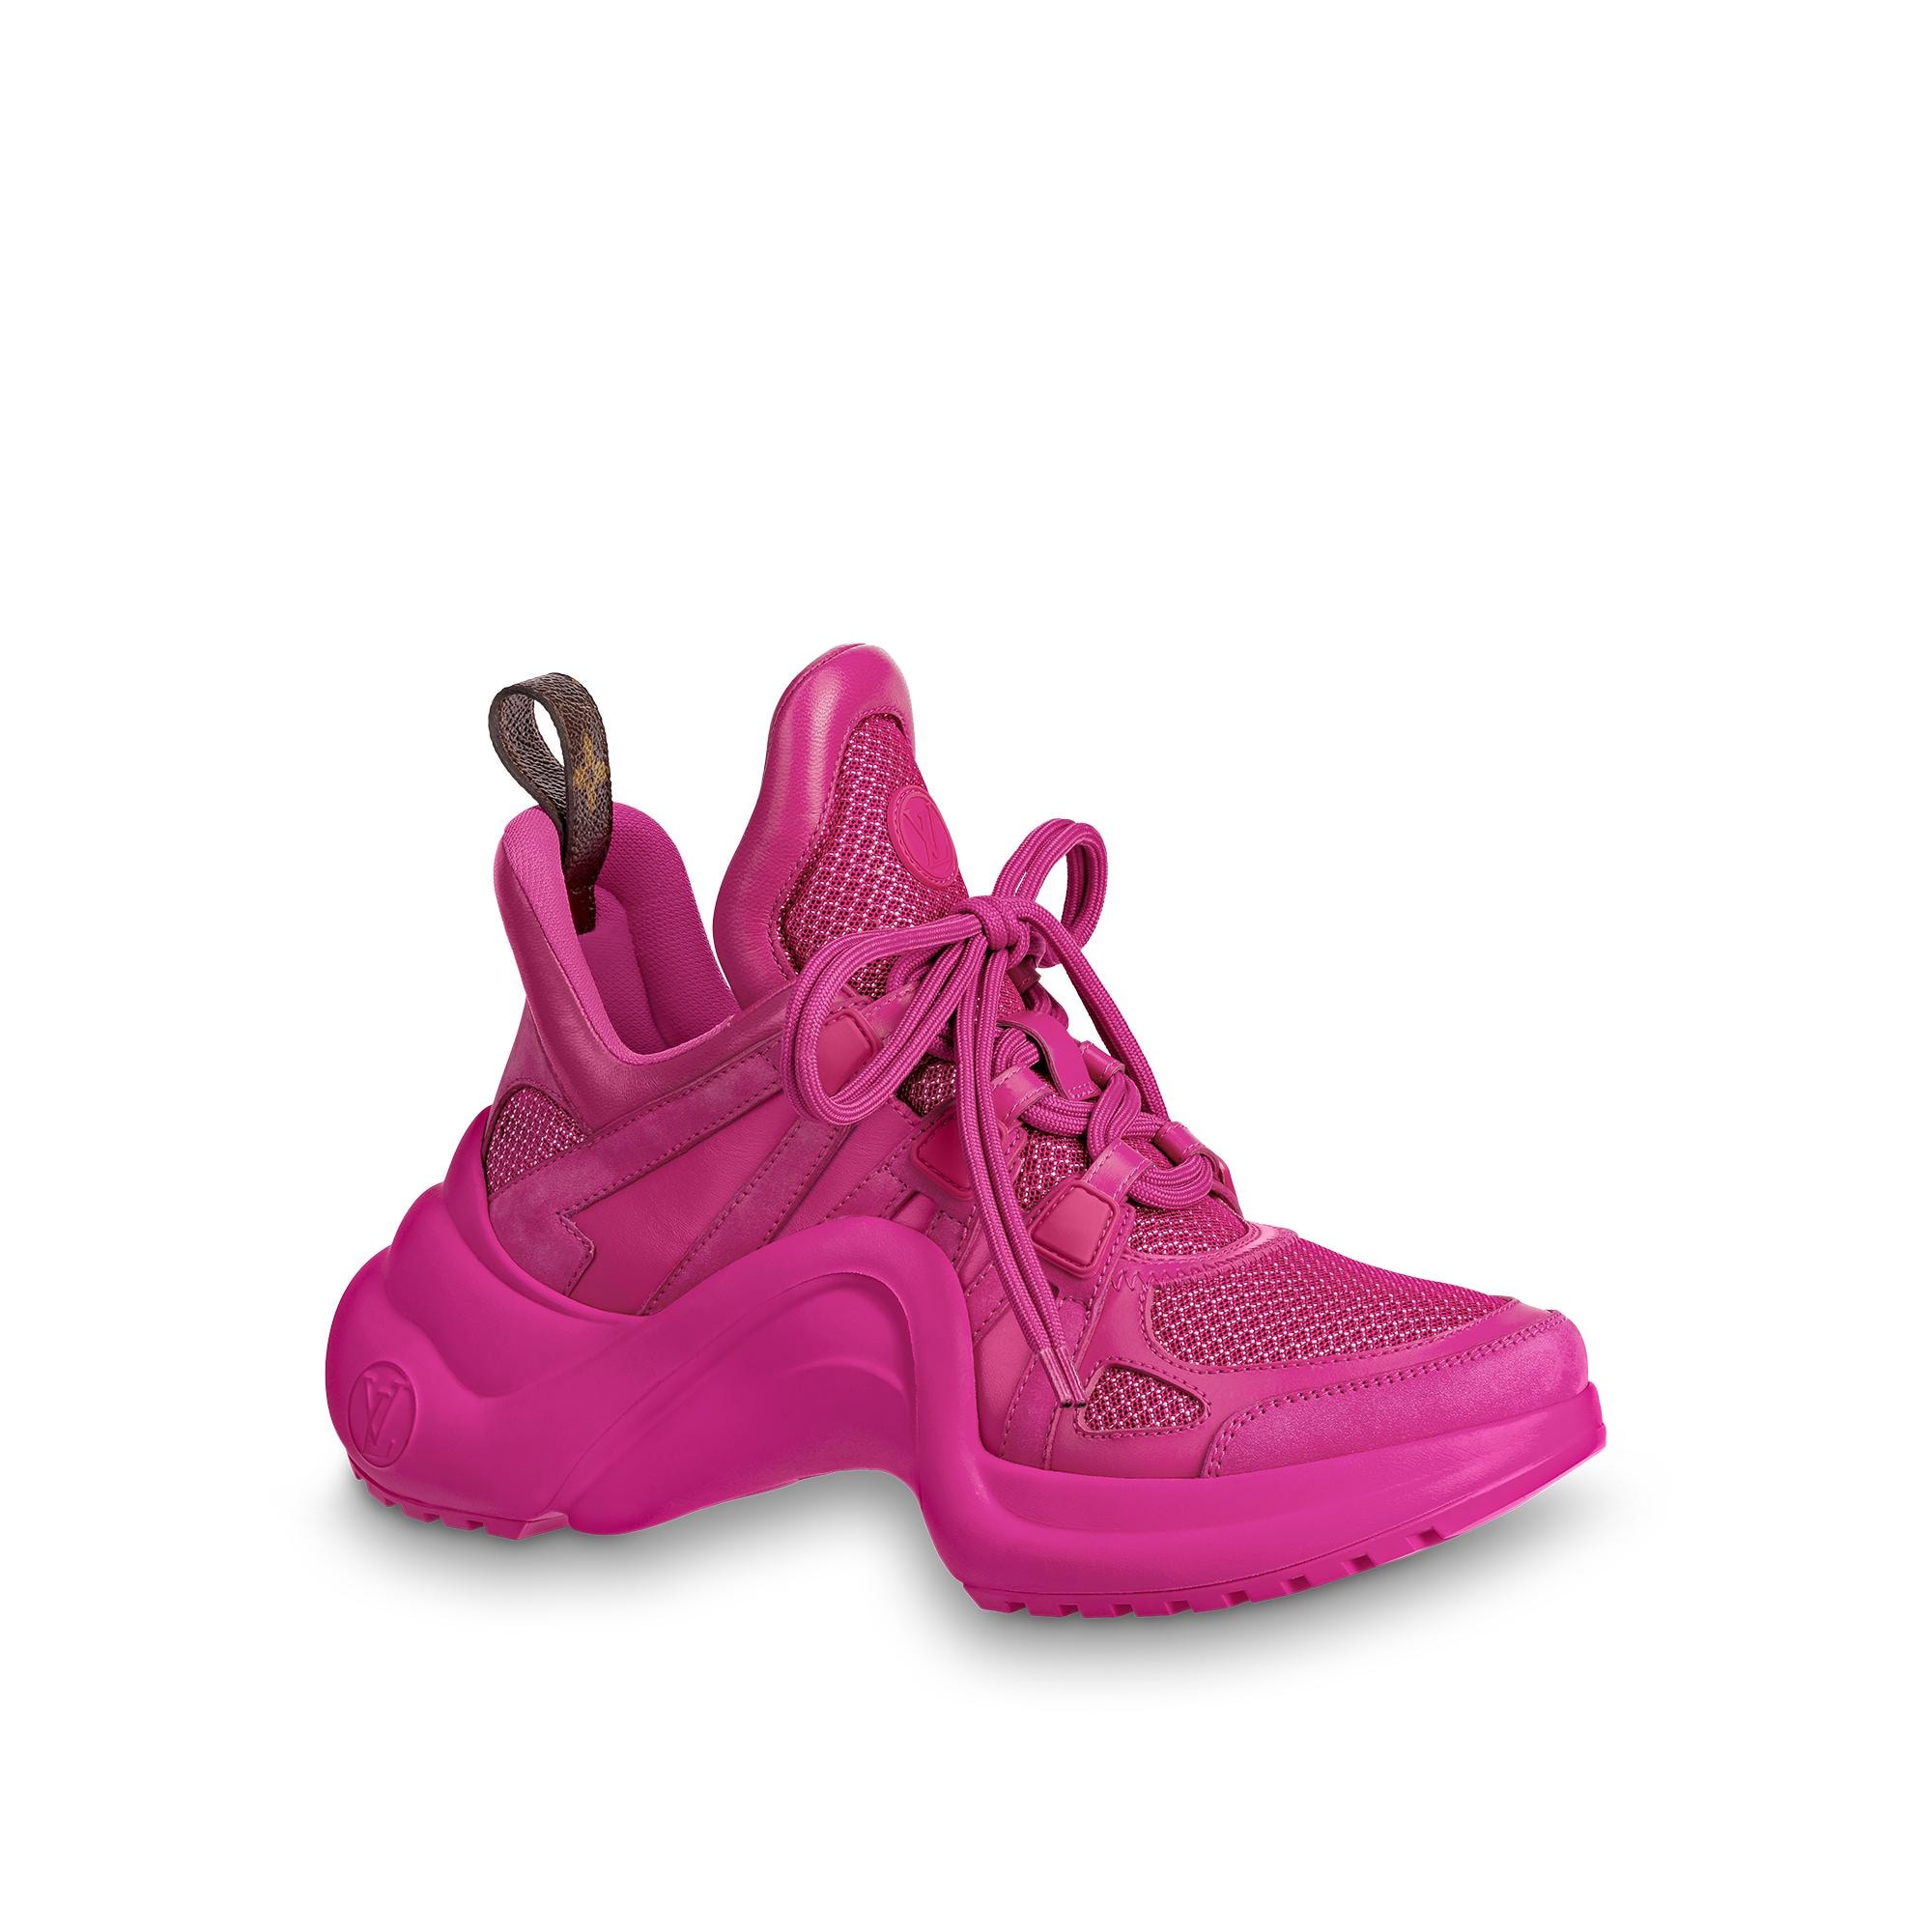 Louis Vuitton LV Archlight Sneaker in Rose - Shoes 1A882Q